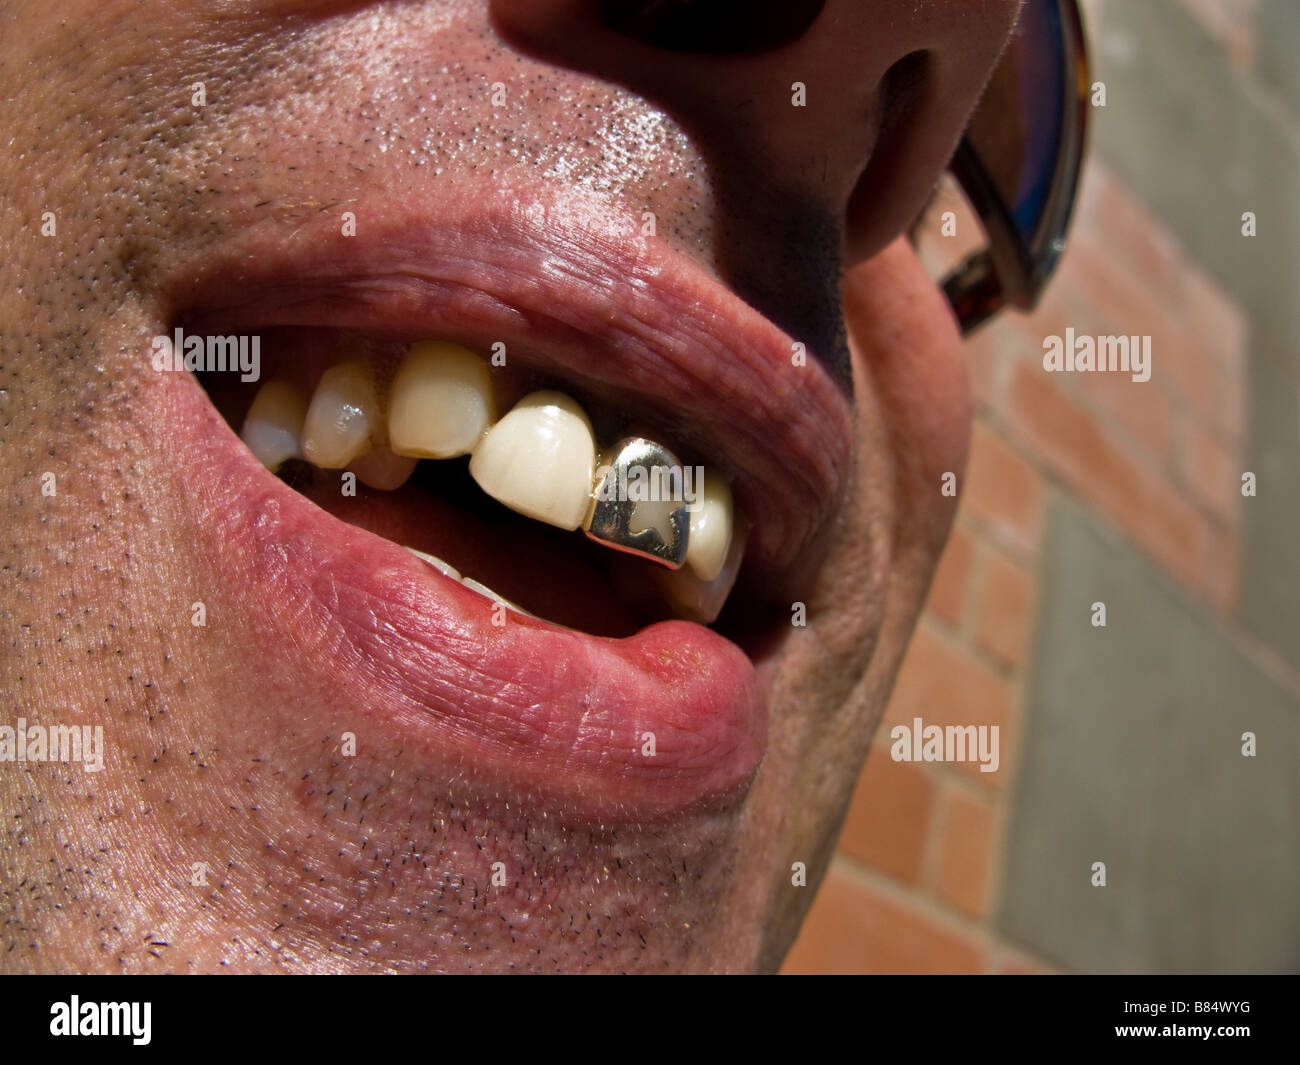 Gold Tooth Smile Stock Photos & Gold Tooth Smile Stock Images - Alamy